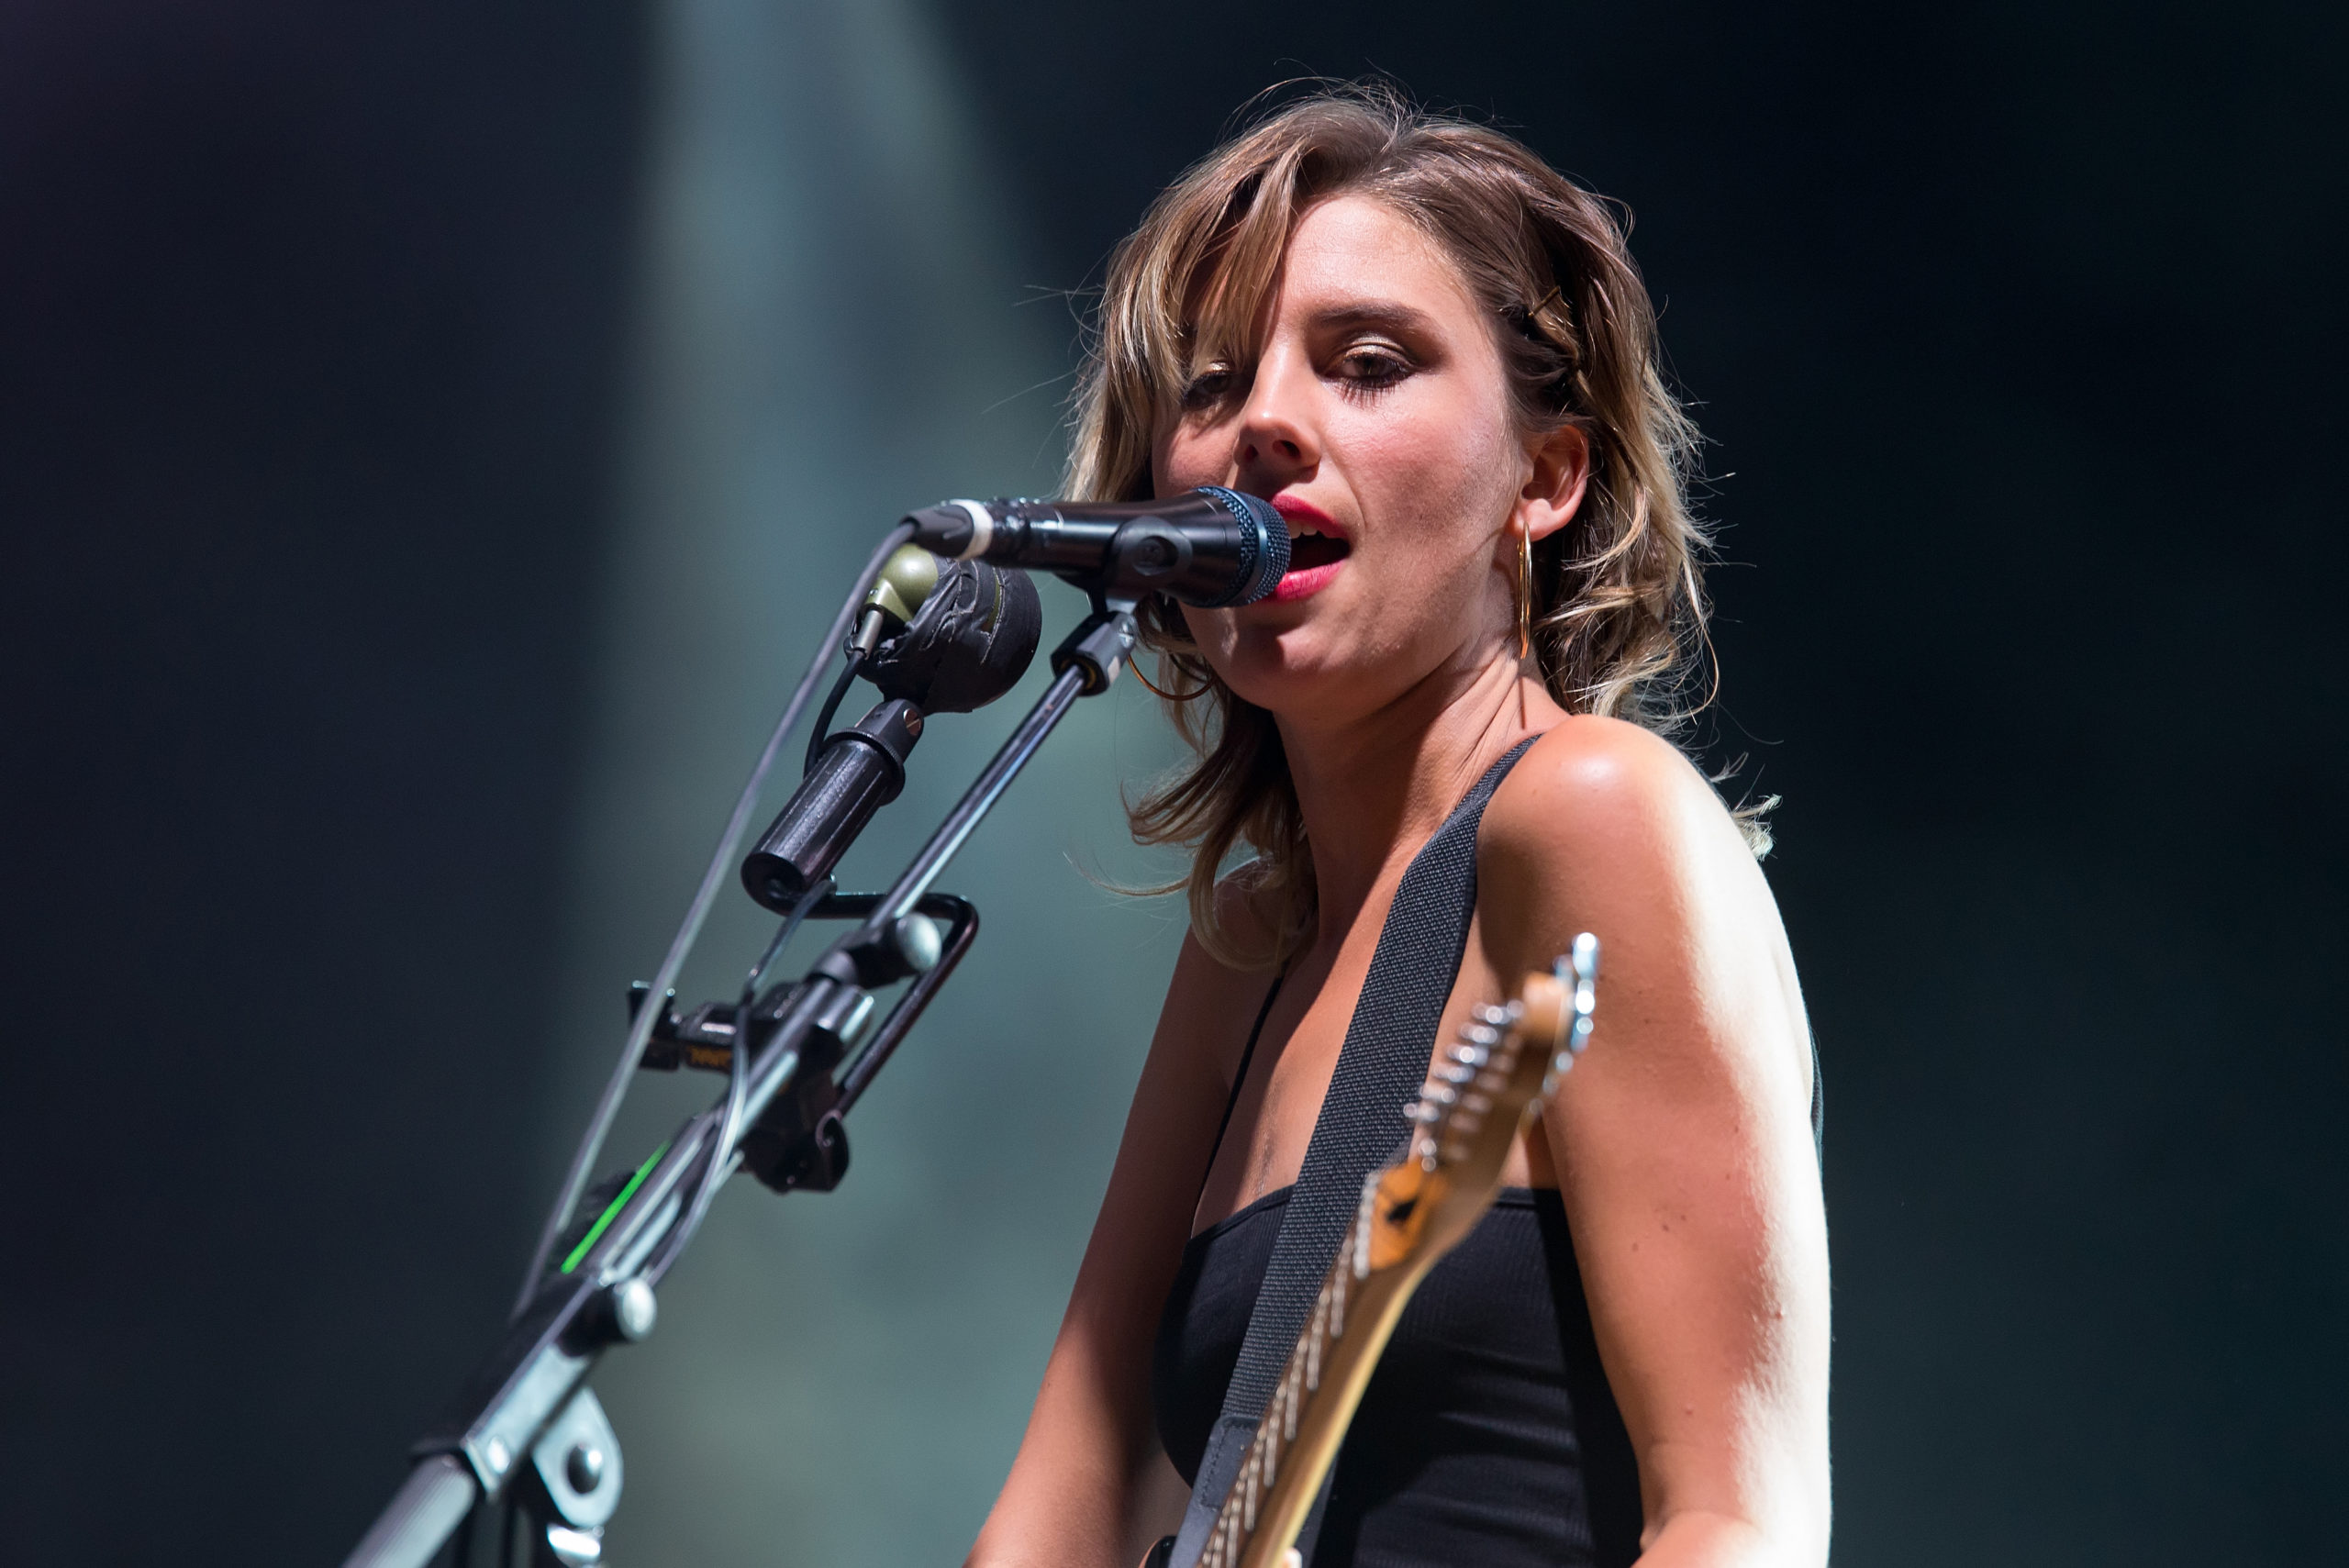 Harry Styles kicked off his final Love On Tour European dates in a special way. Ellie Rowsell, lead singer of the British alternative rock and dream-pop band Wolf Alice, joined Styles on stage to perform one of her songs: 